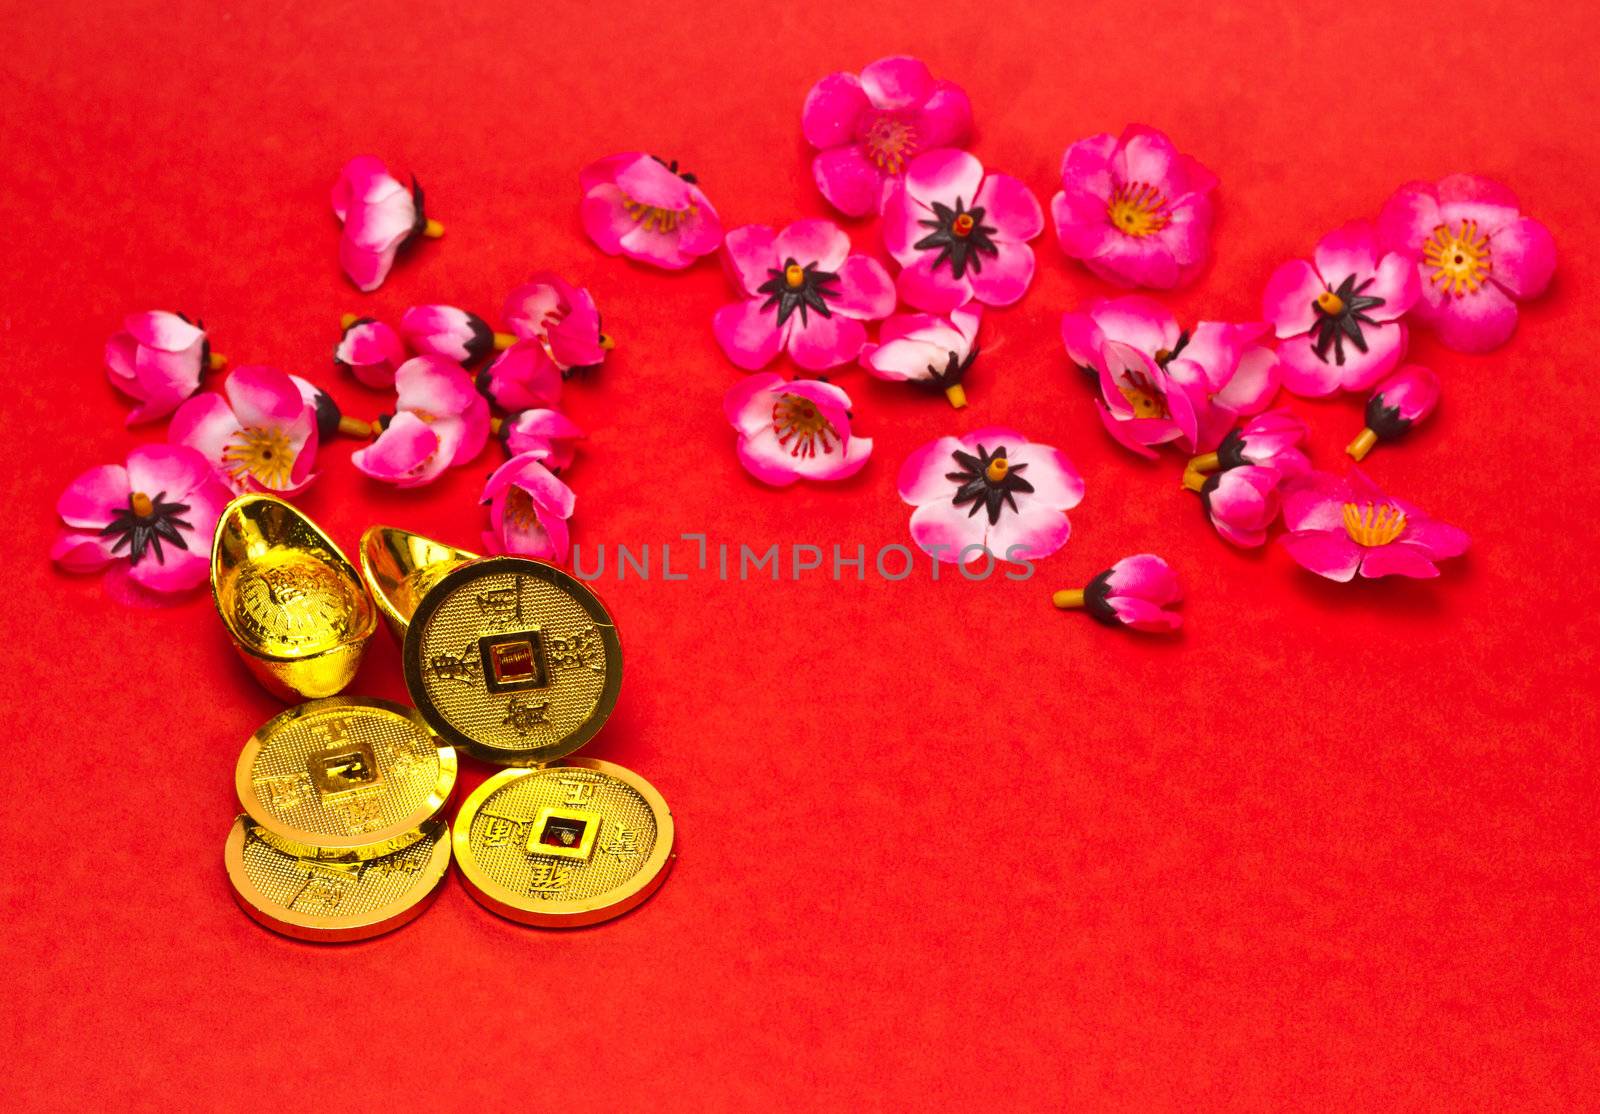 Golden nuggets and emperors coins with cherry plum blossoms on red surface for Chinese New Year